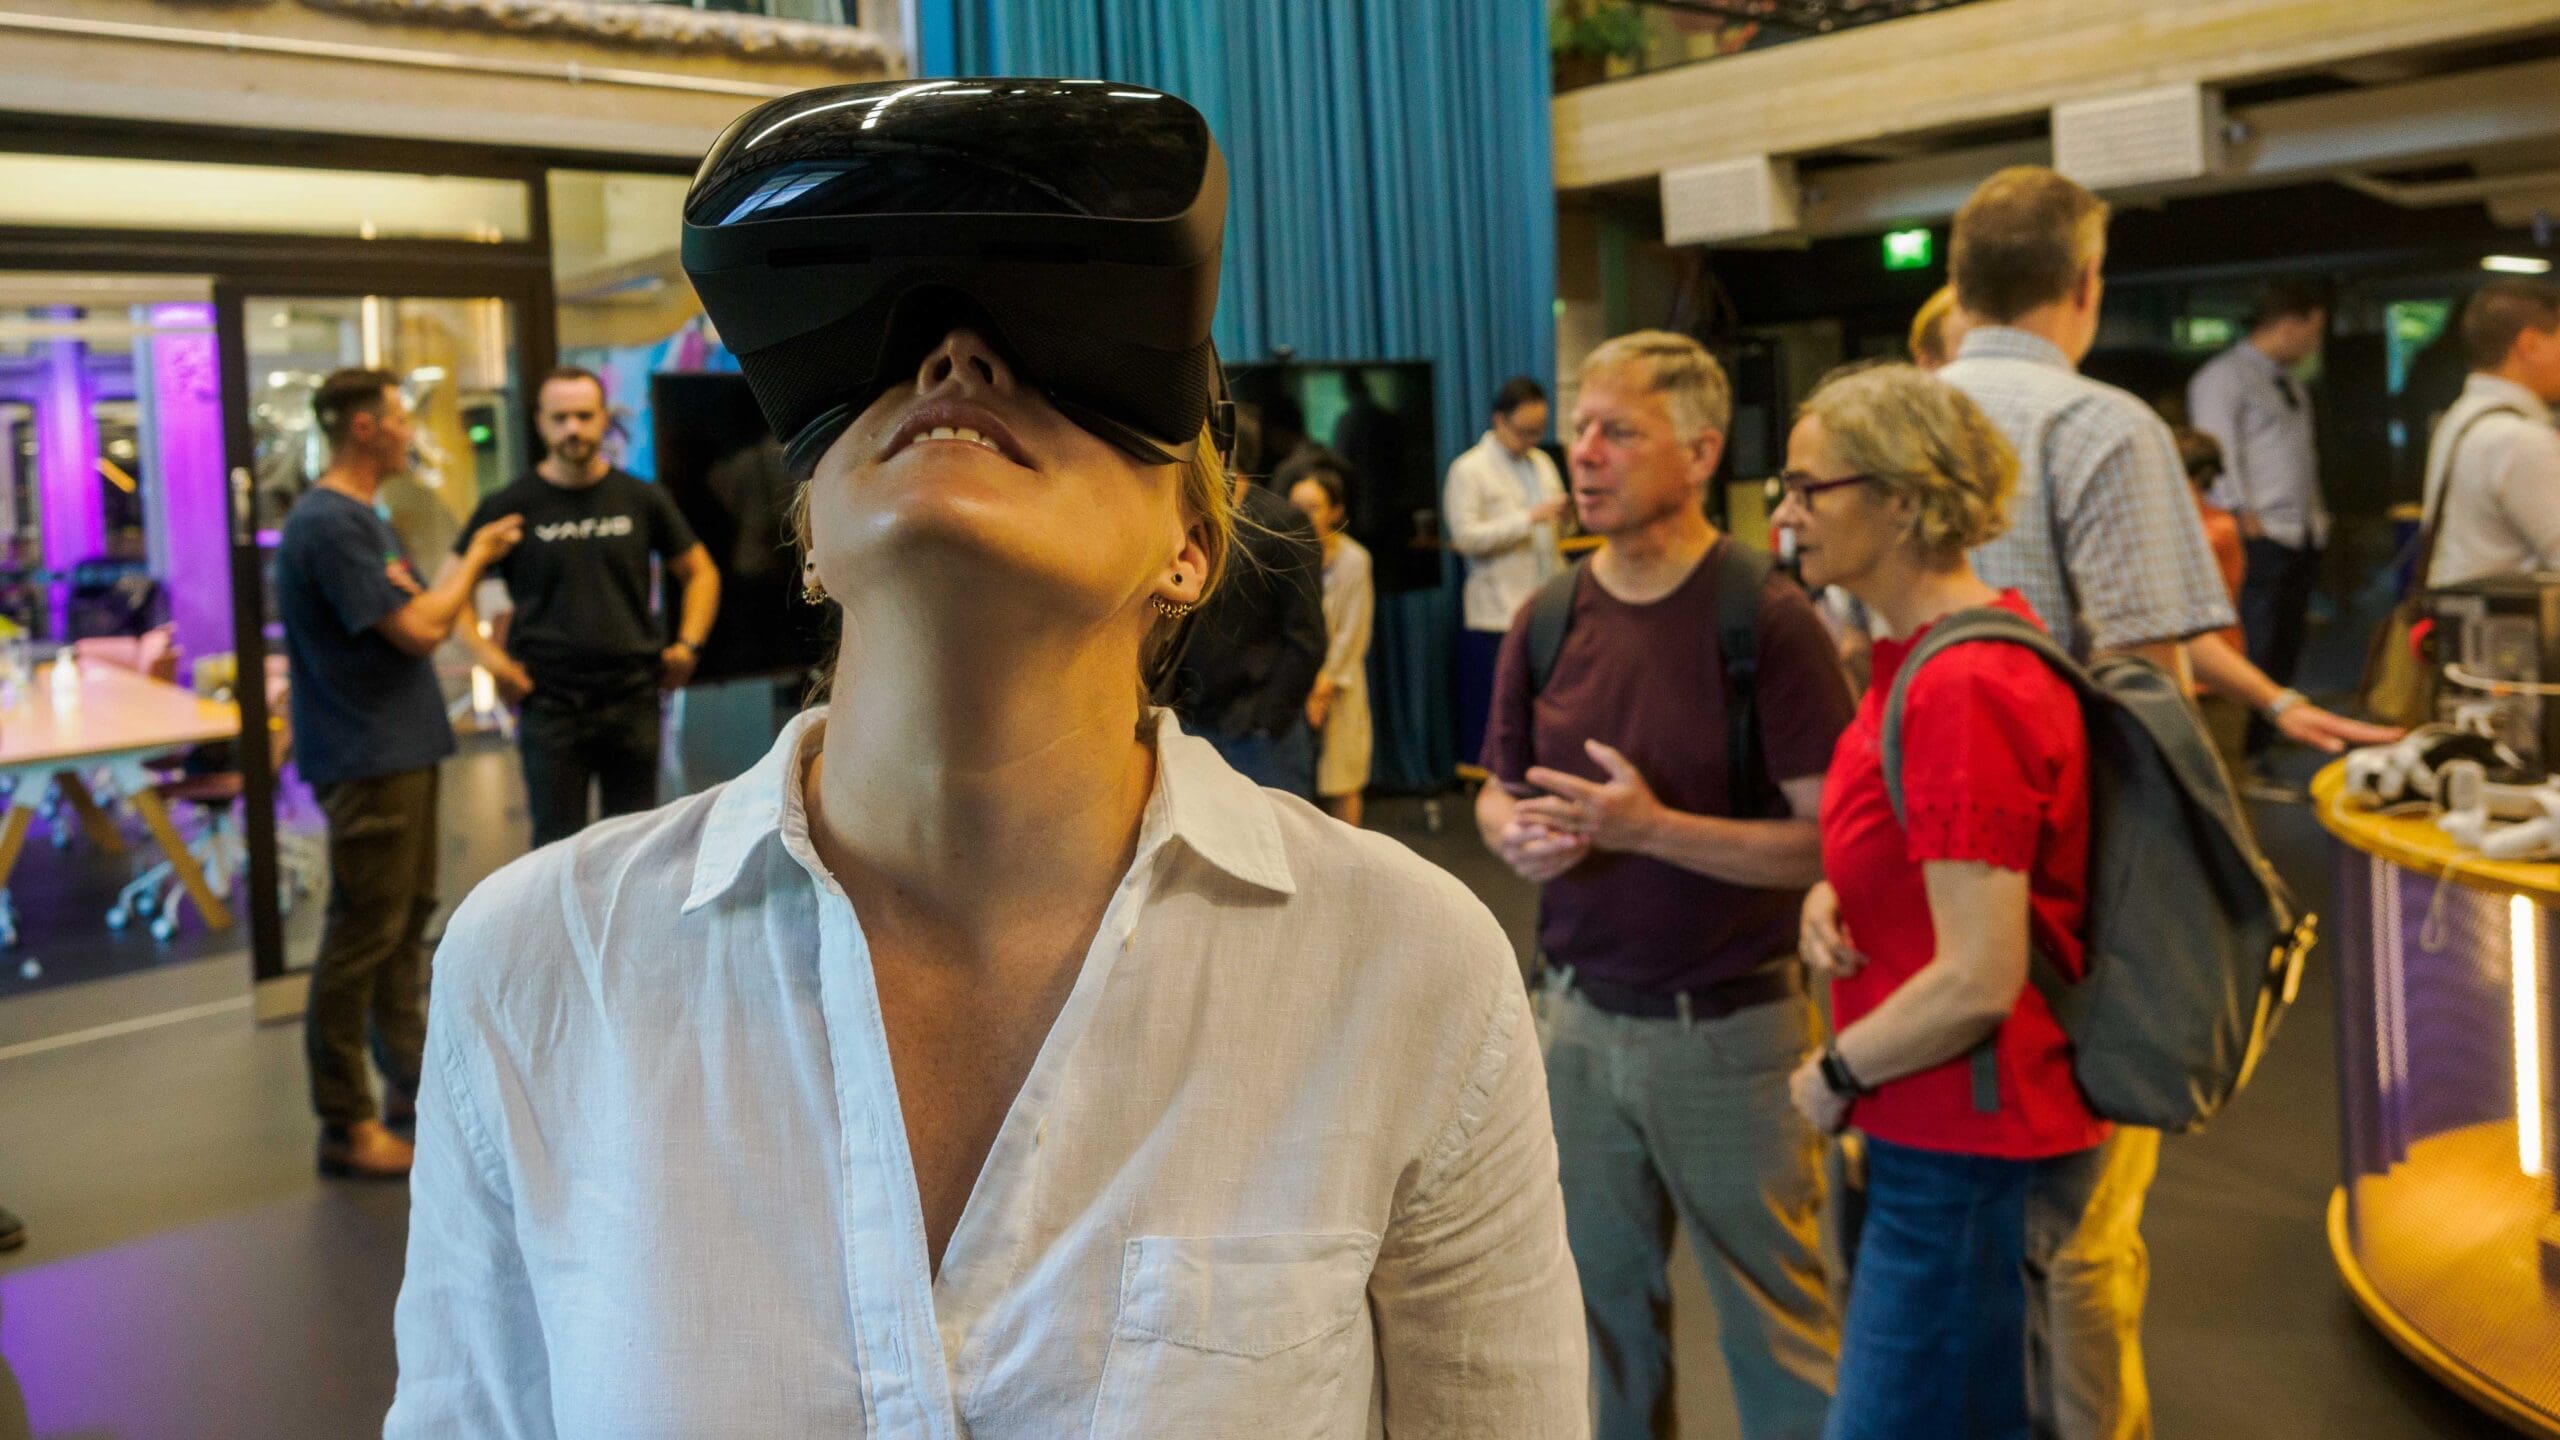 Woman looking up with the black VR glasses. She is wearing a white shirt and in the background one can see other people mingling.